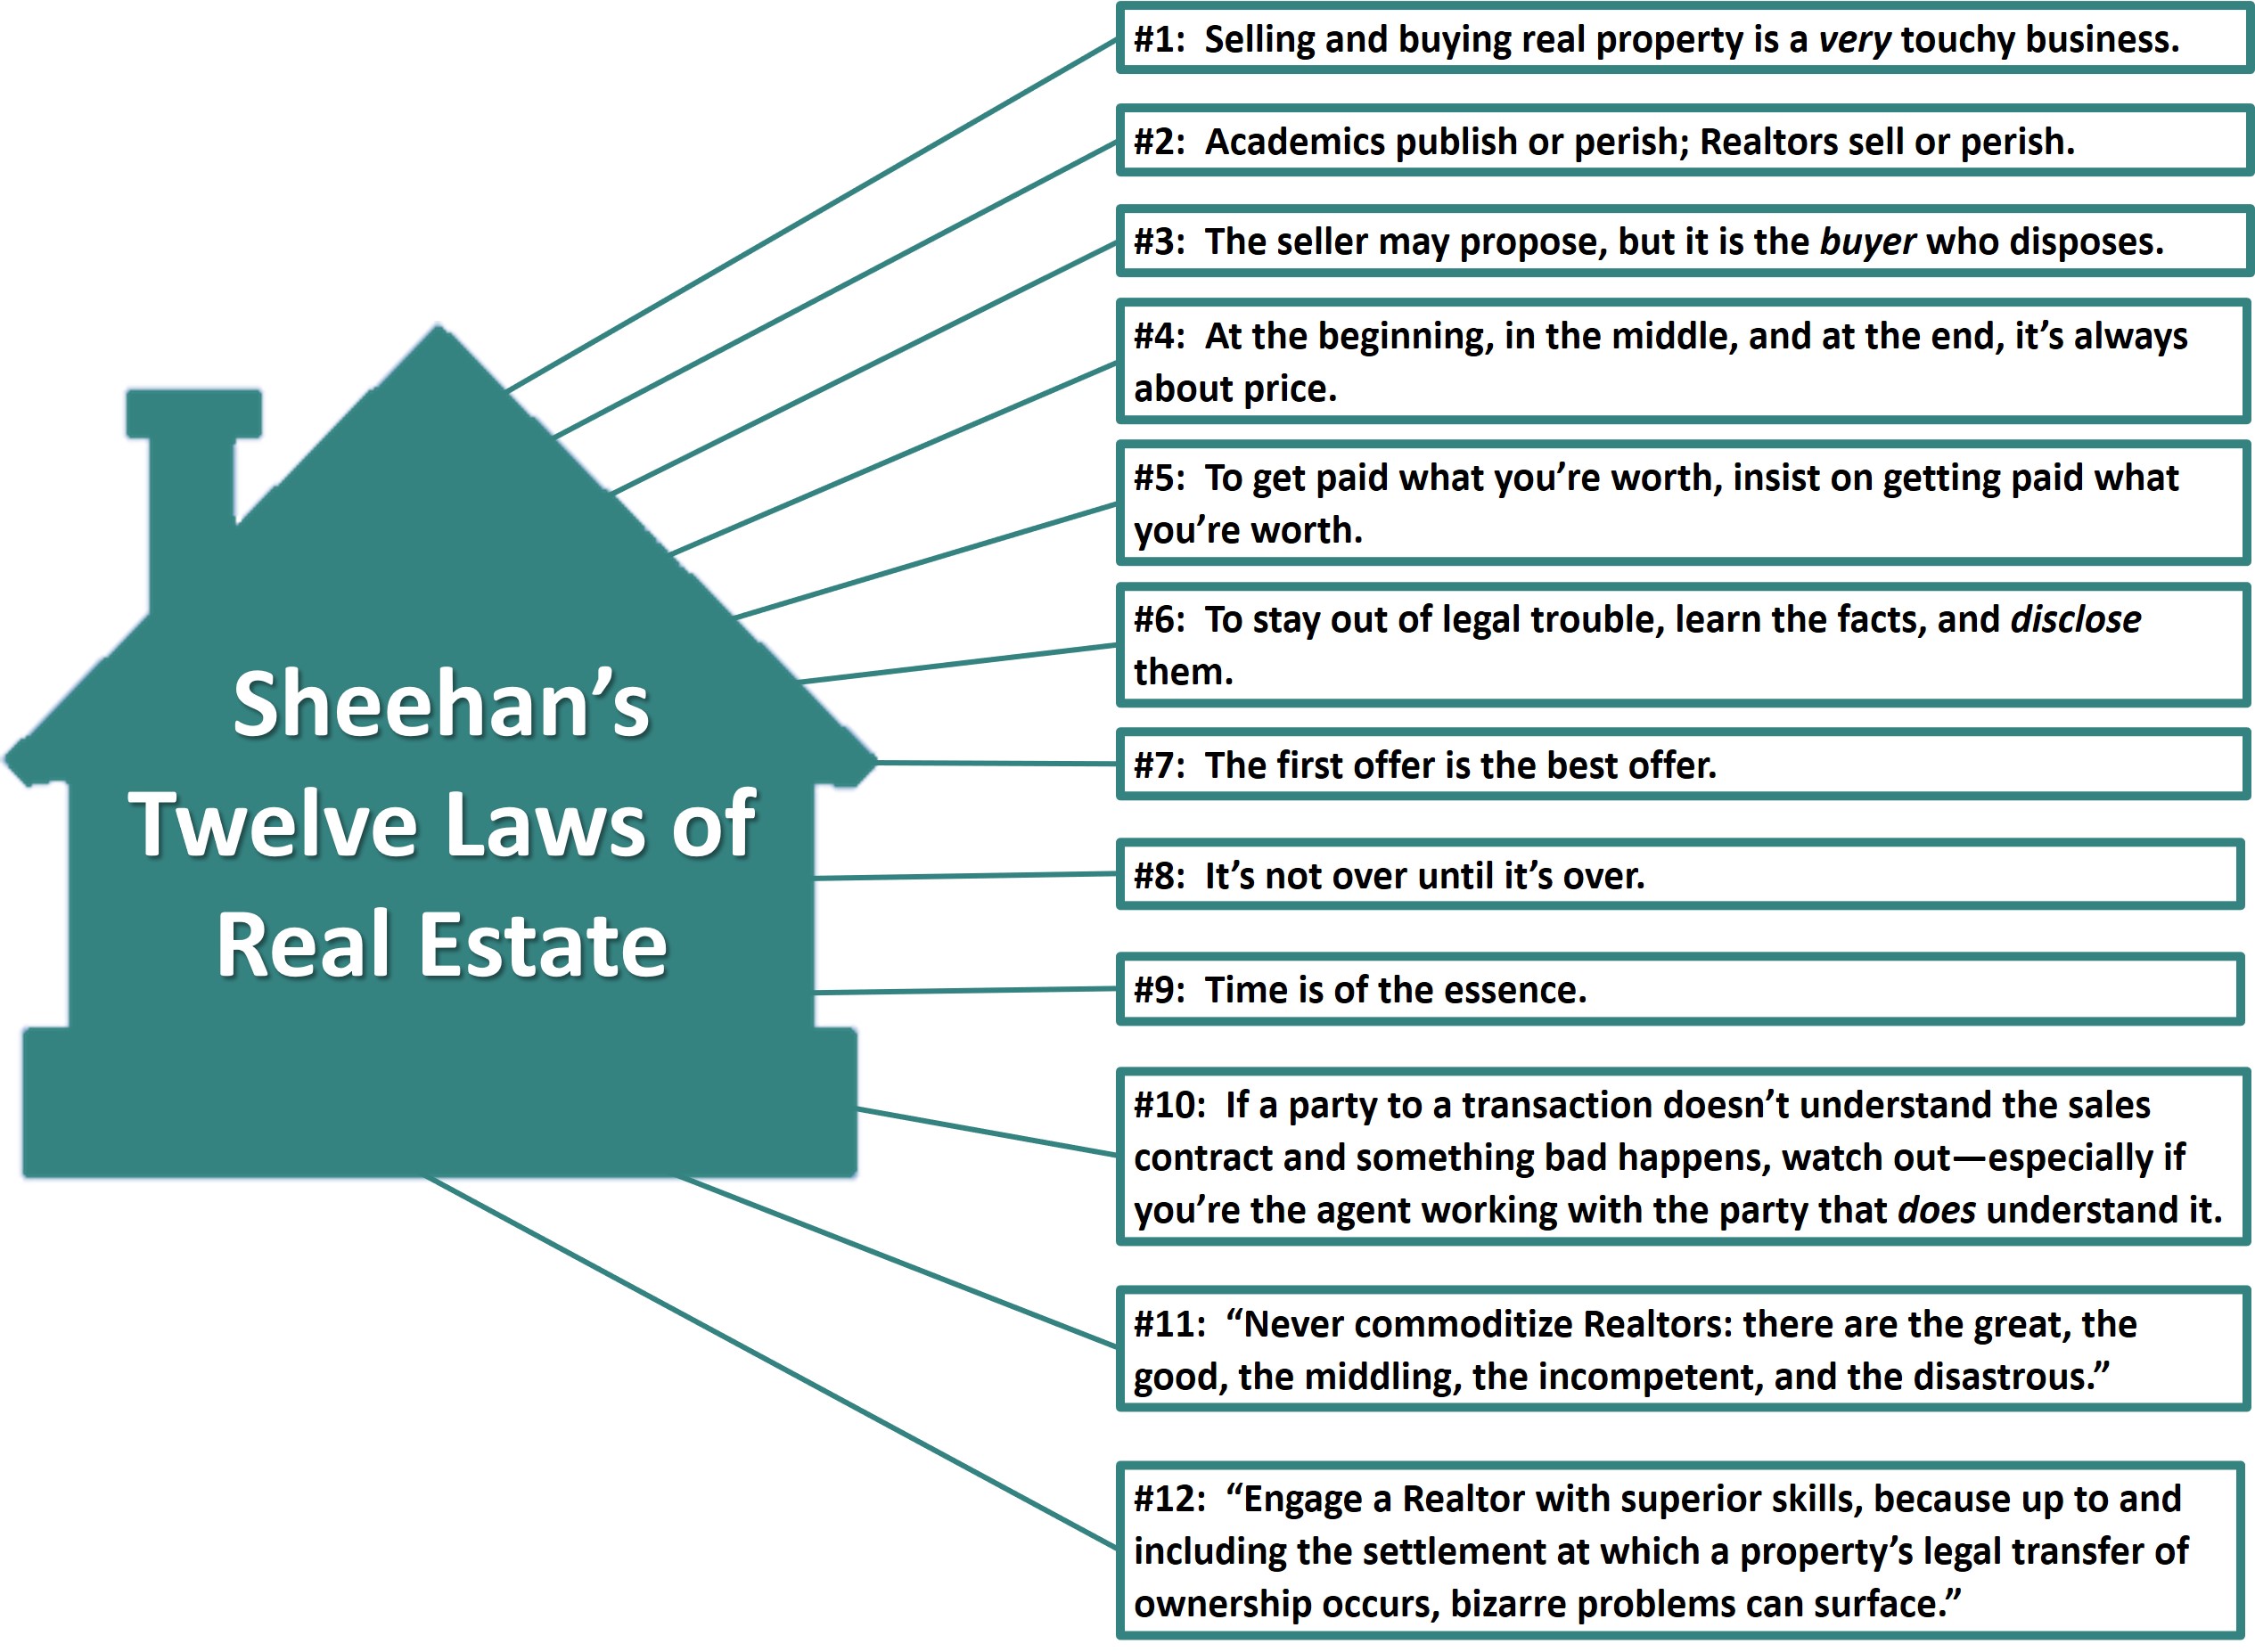 Real estate laws for homebuyers and sellers